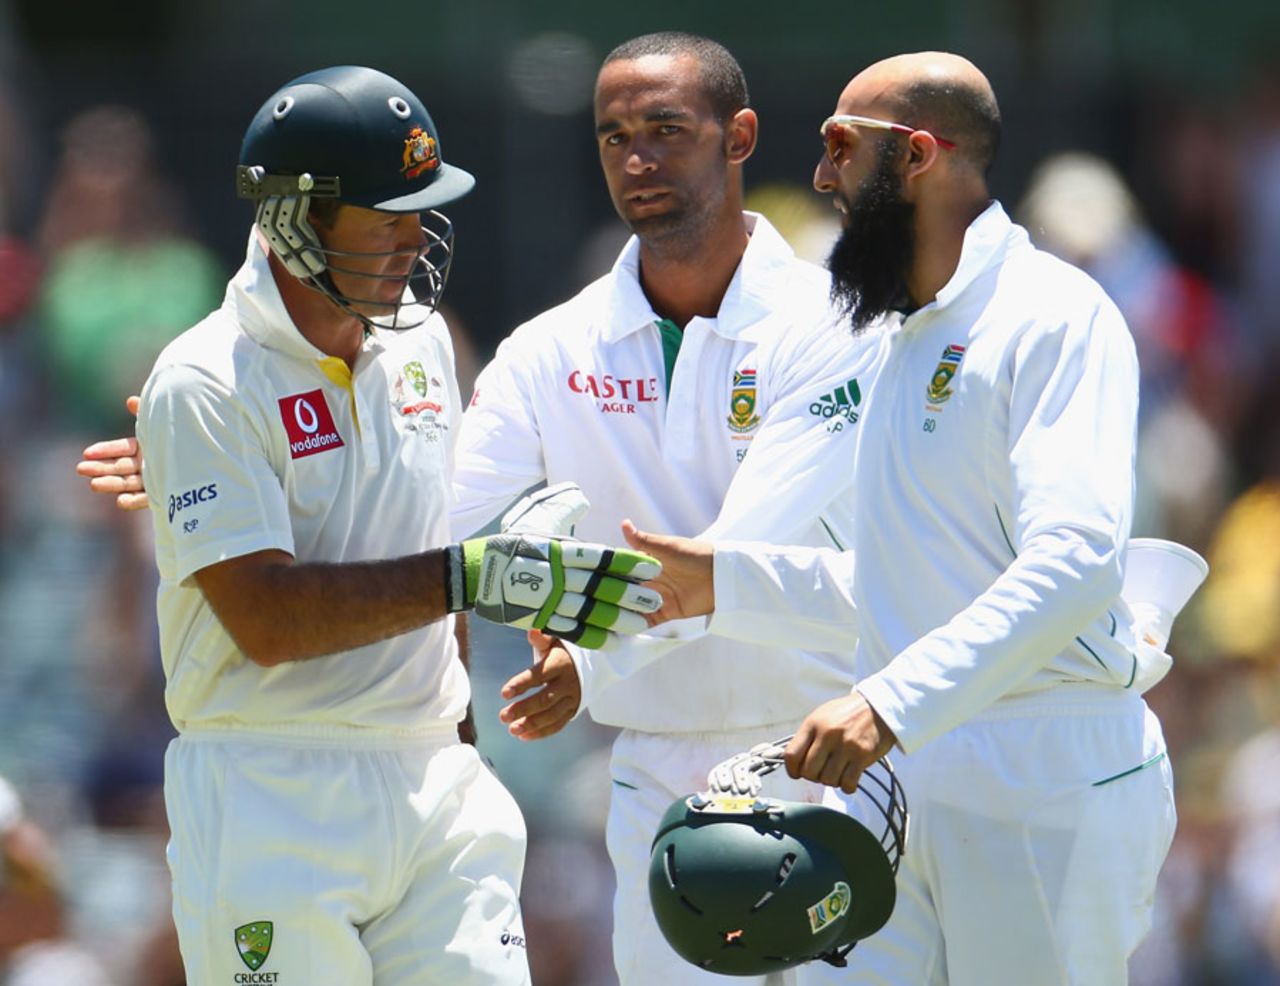 Hashim Amla and Robin Peterson congratulate Ricky Ponting, Australia v South Africa, 3rd Test, Perth, 4th day, December 3, 2012